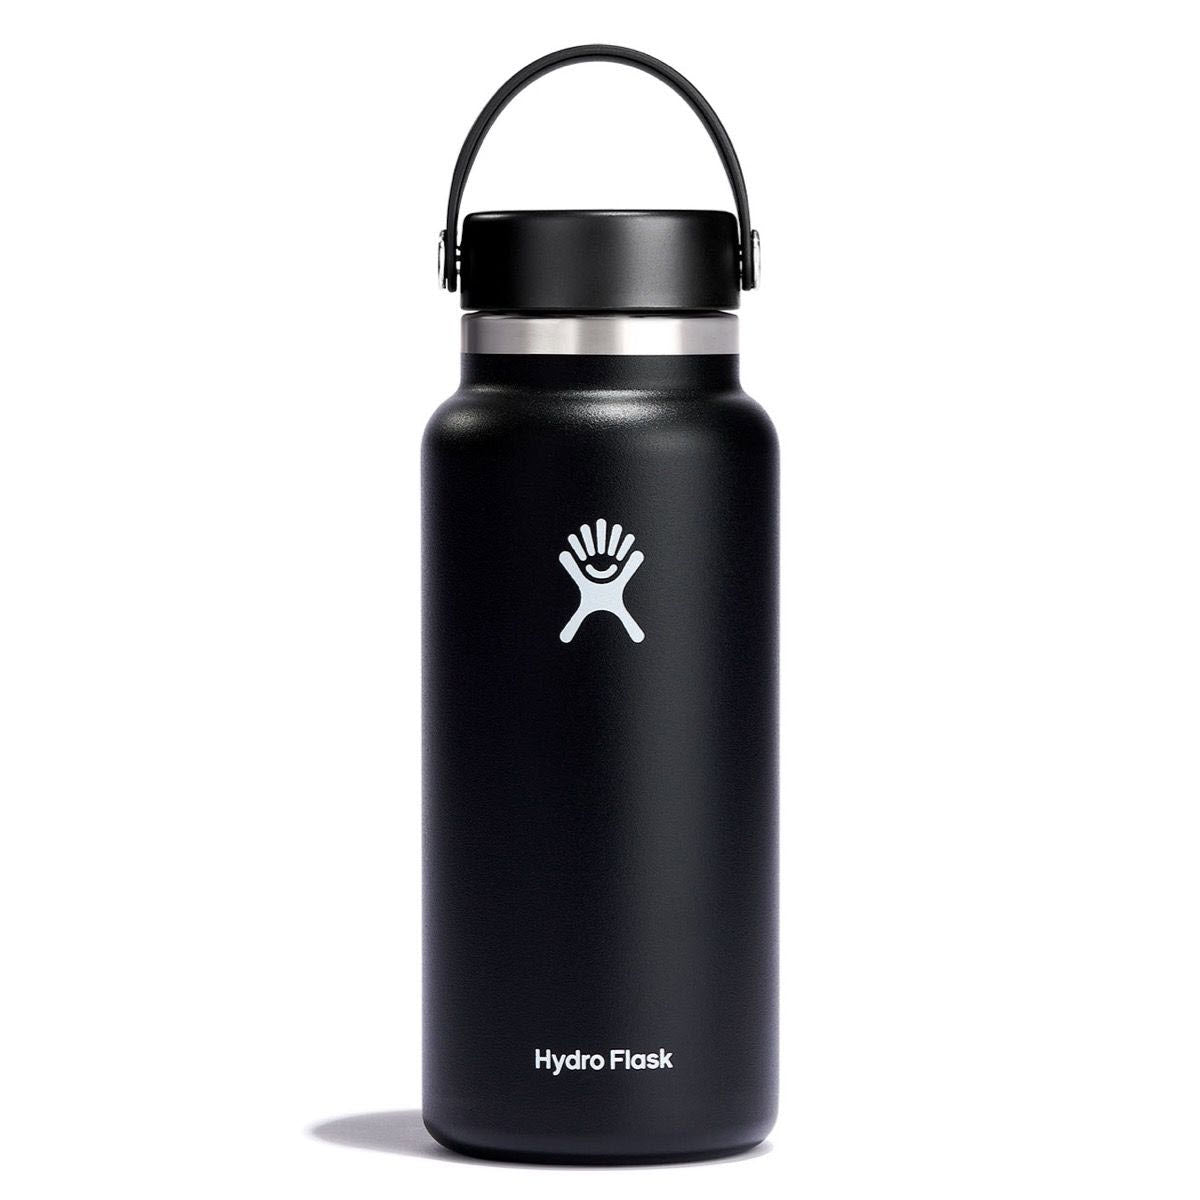 Hydro Flask Wide Mouth 32oz Black insulated stainless steel Bottle with a brand logo featuring Color Last™ powder coat.